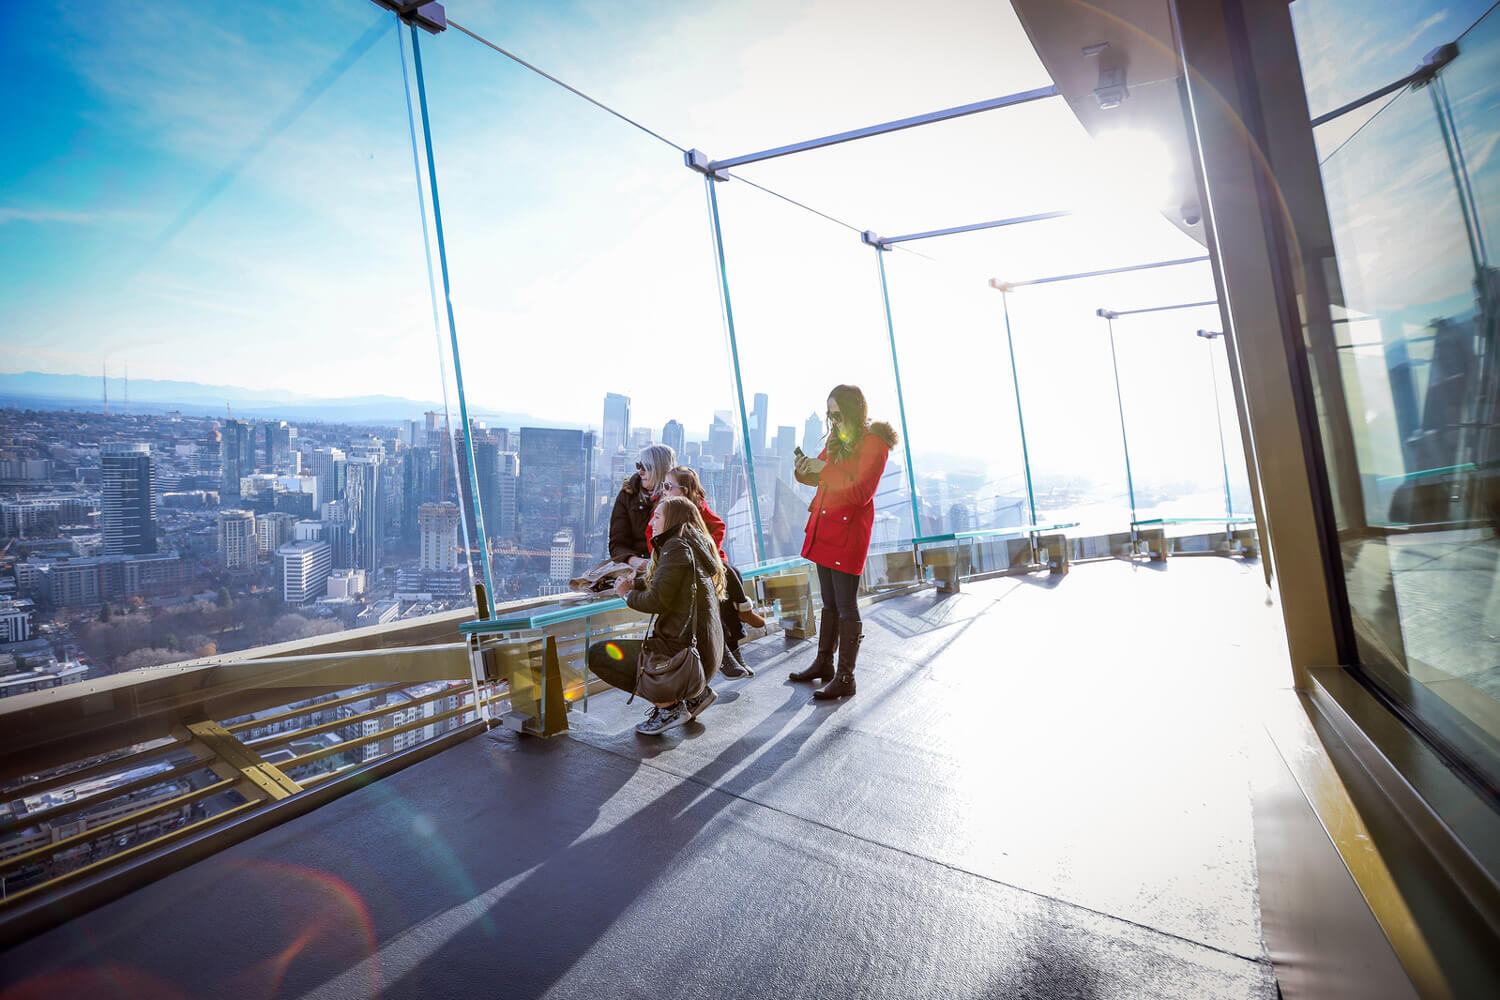 A group of women take in the view of Seattle from the deck of the Space Needle.